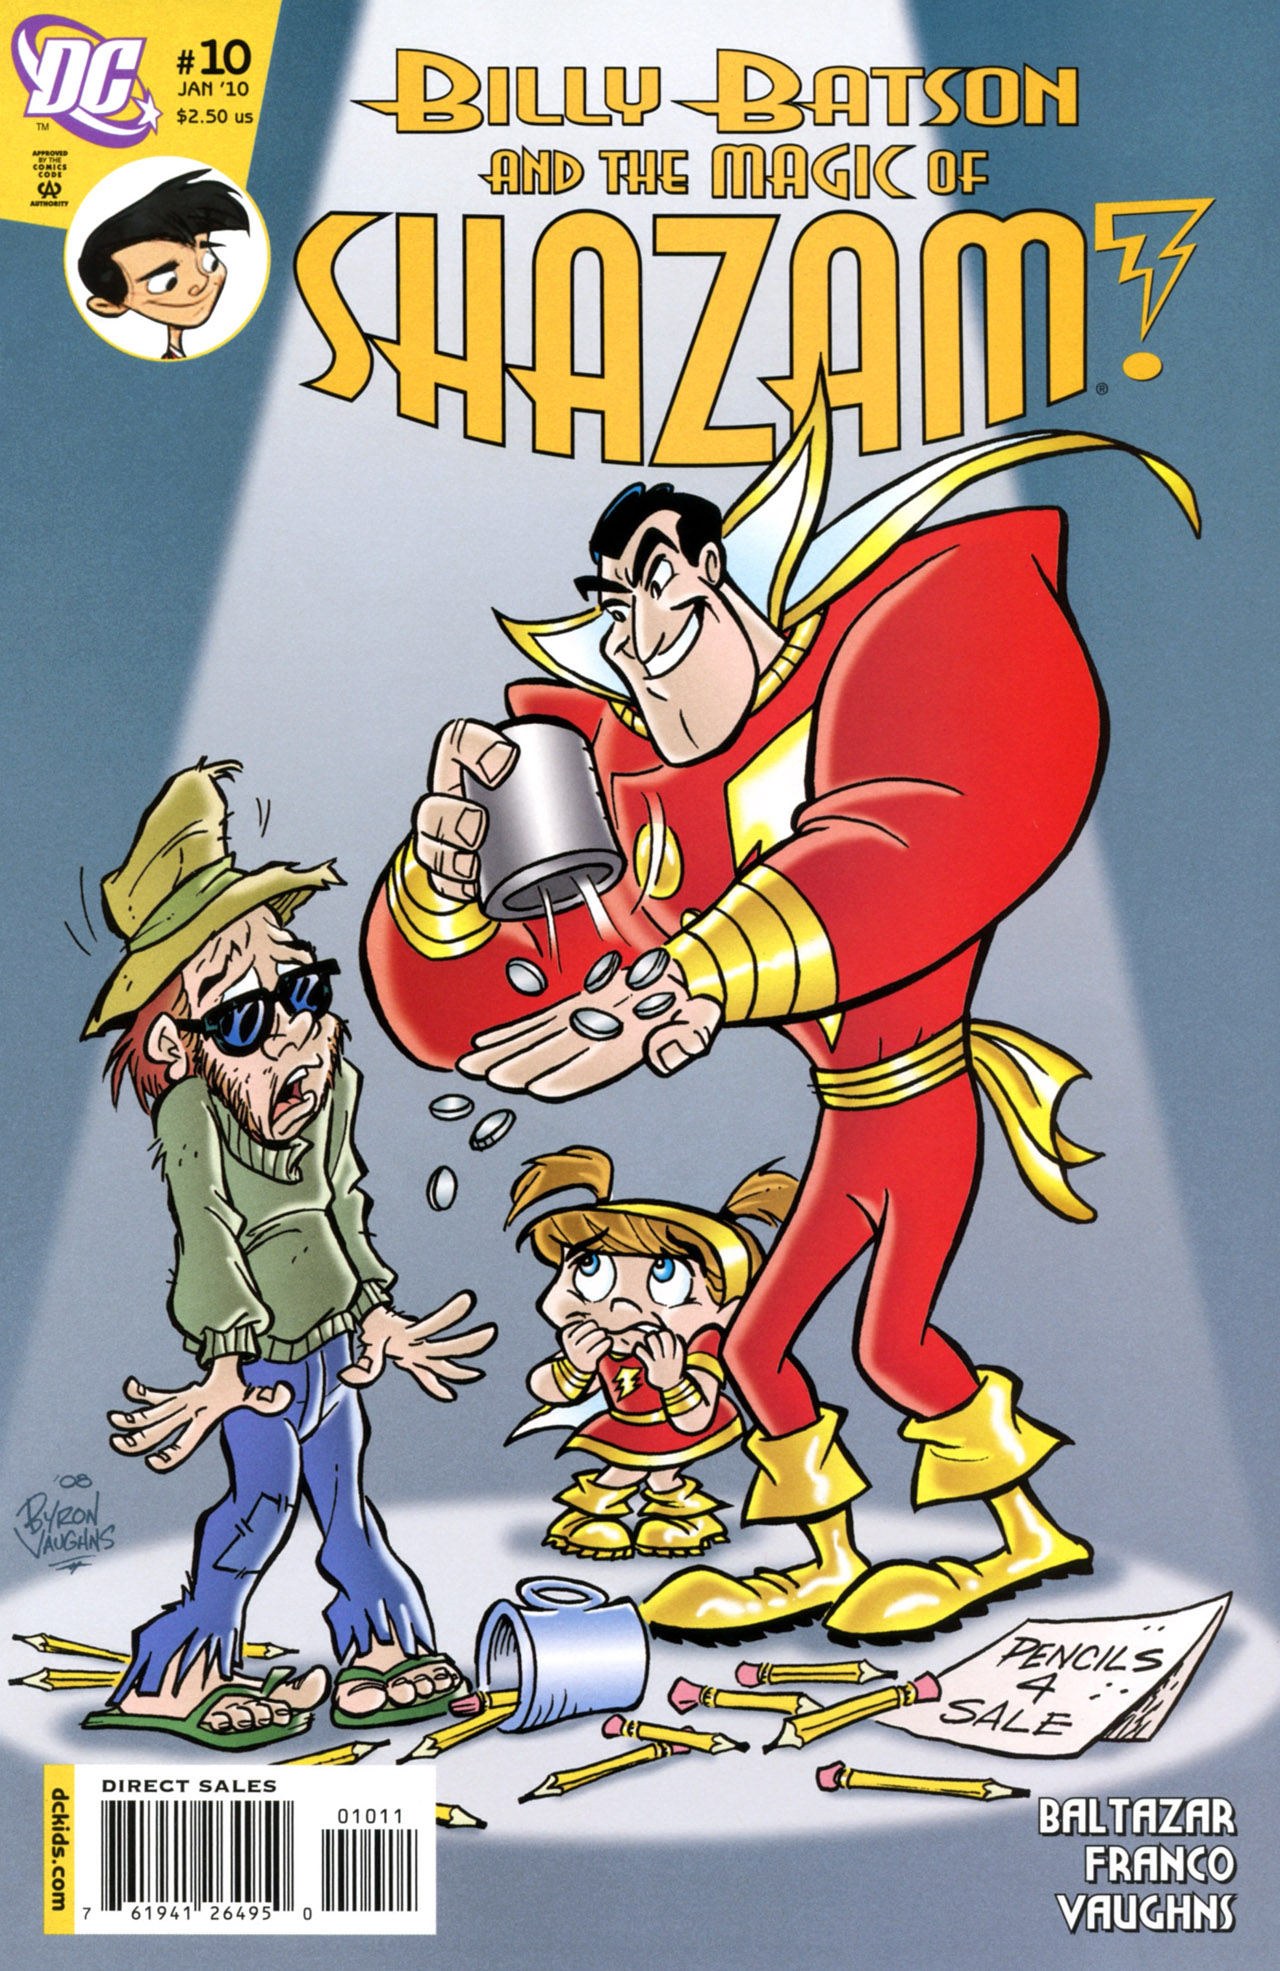 Read online Billy Batson & The Magic of Shazam! comic -  Issue #10 - 1